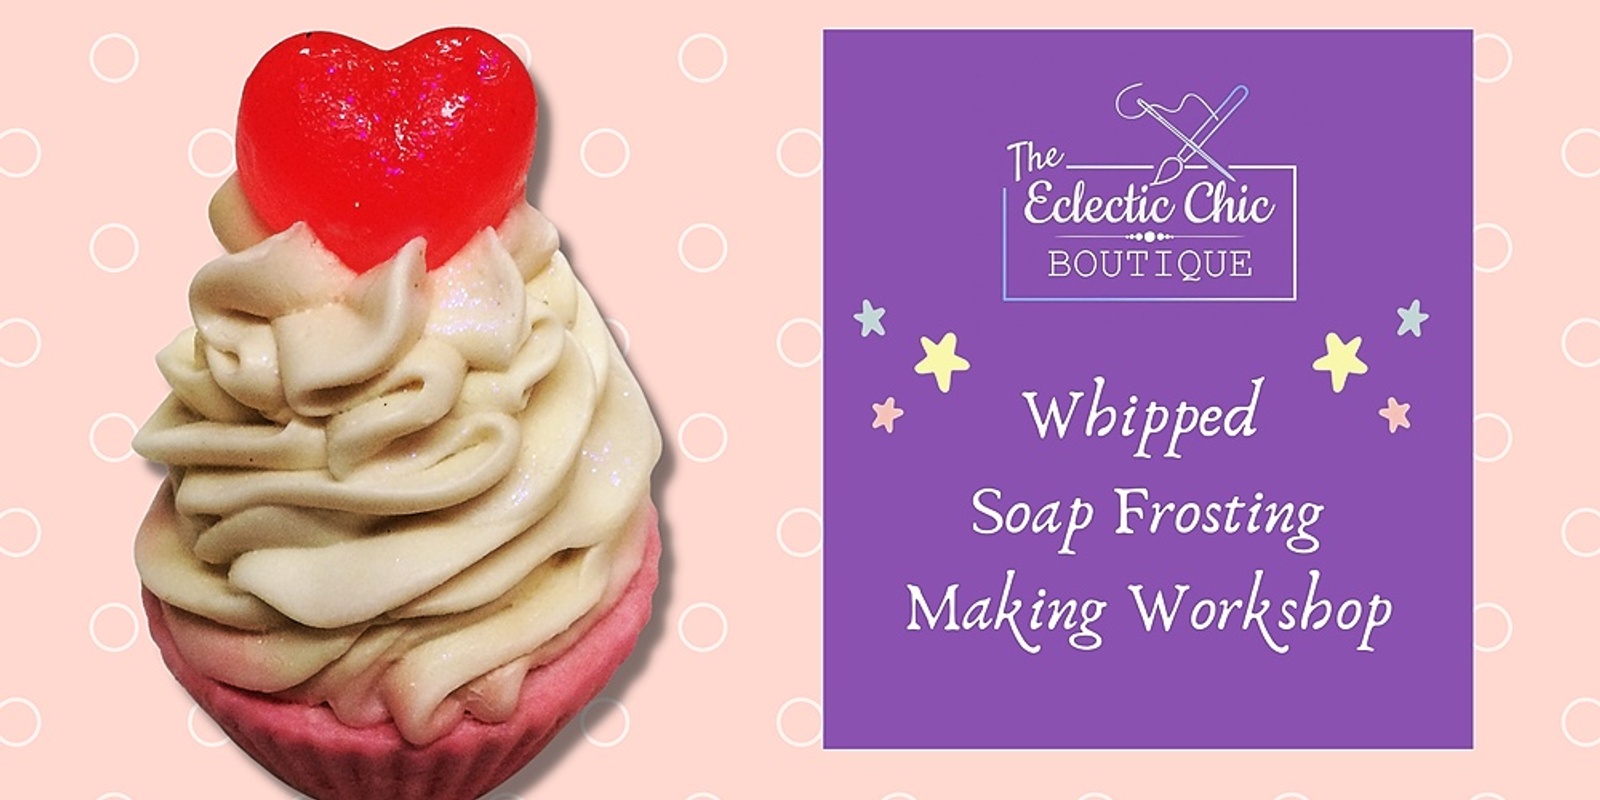 Whipped Soap Frosting Making Workshop